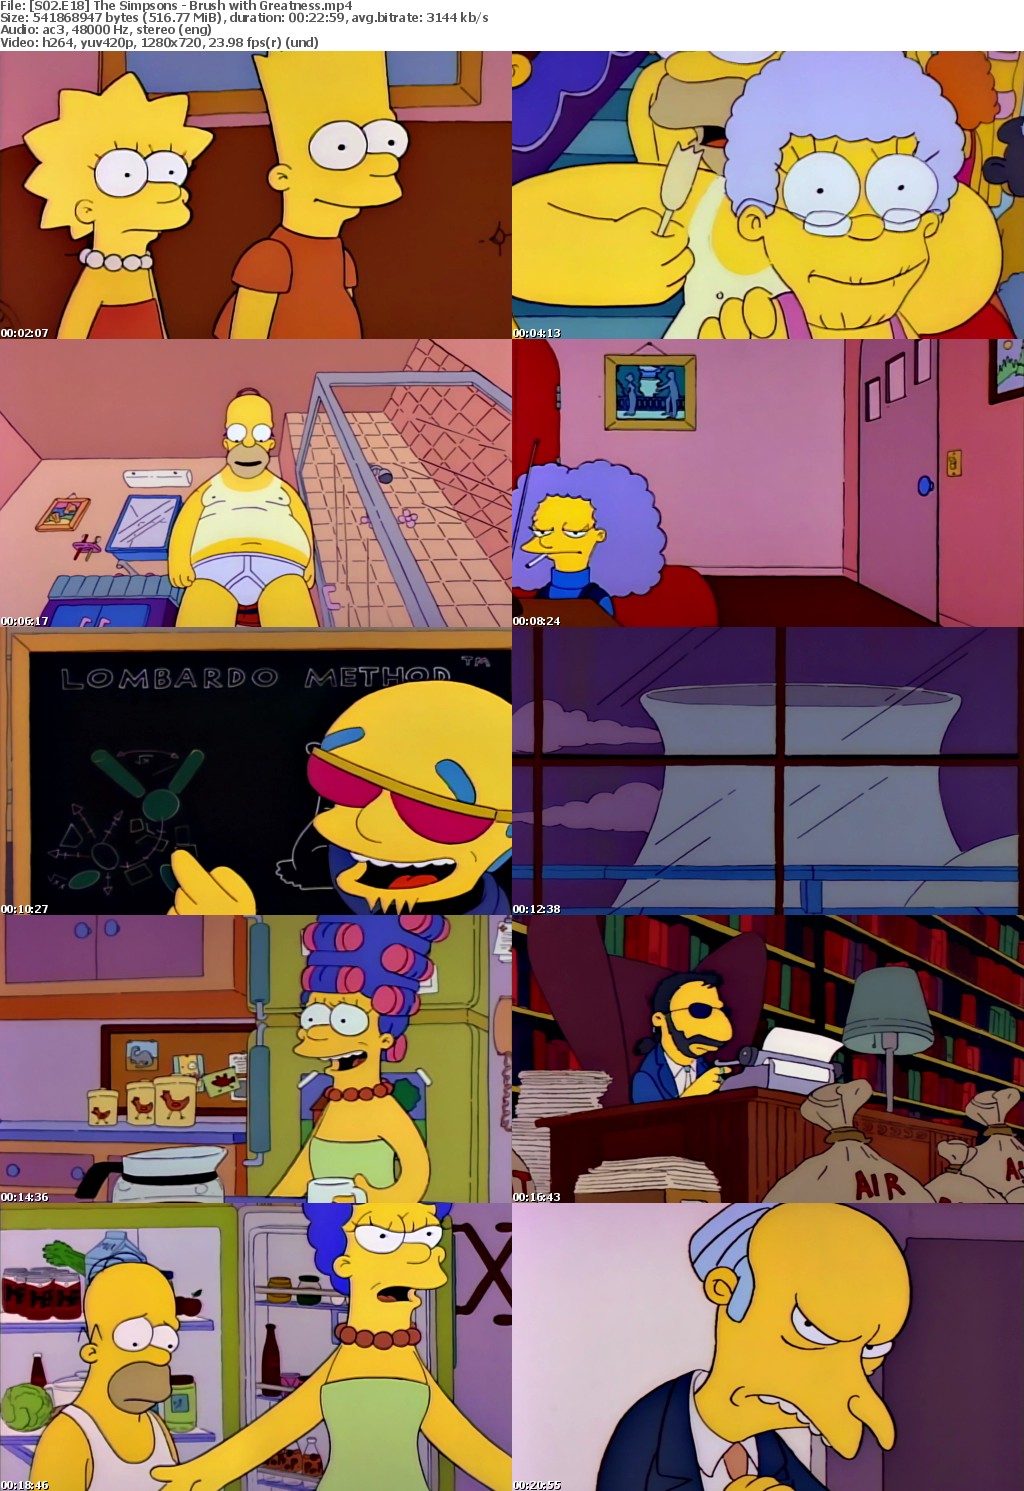 The Simpsons S2 E18 Brush with Greatness MP4 720p H264 WEBRip EzzRips